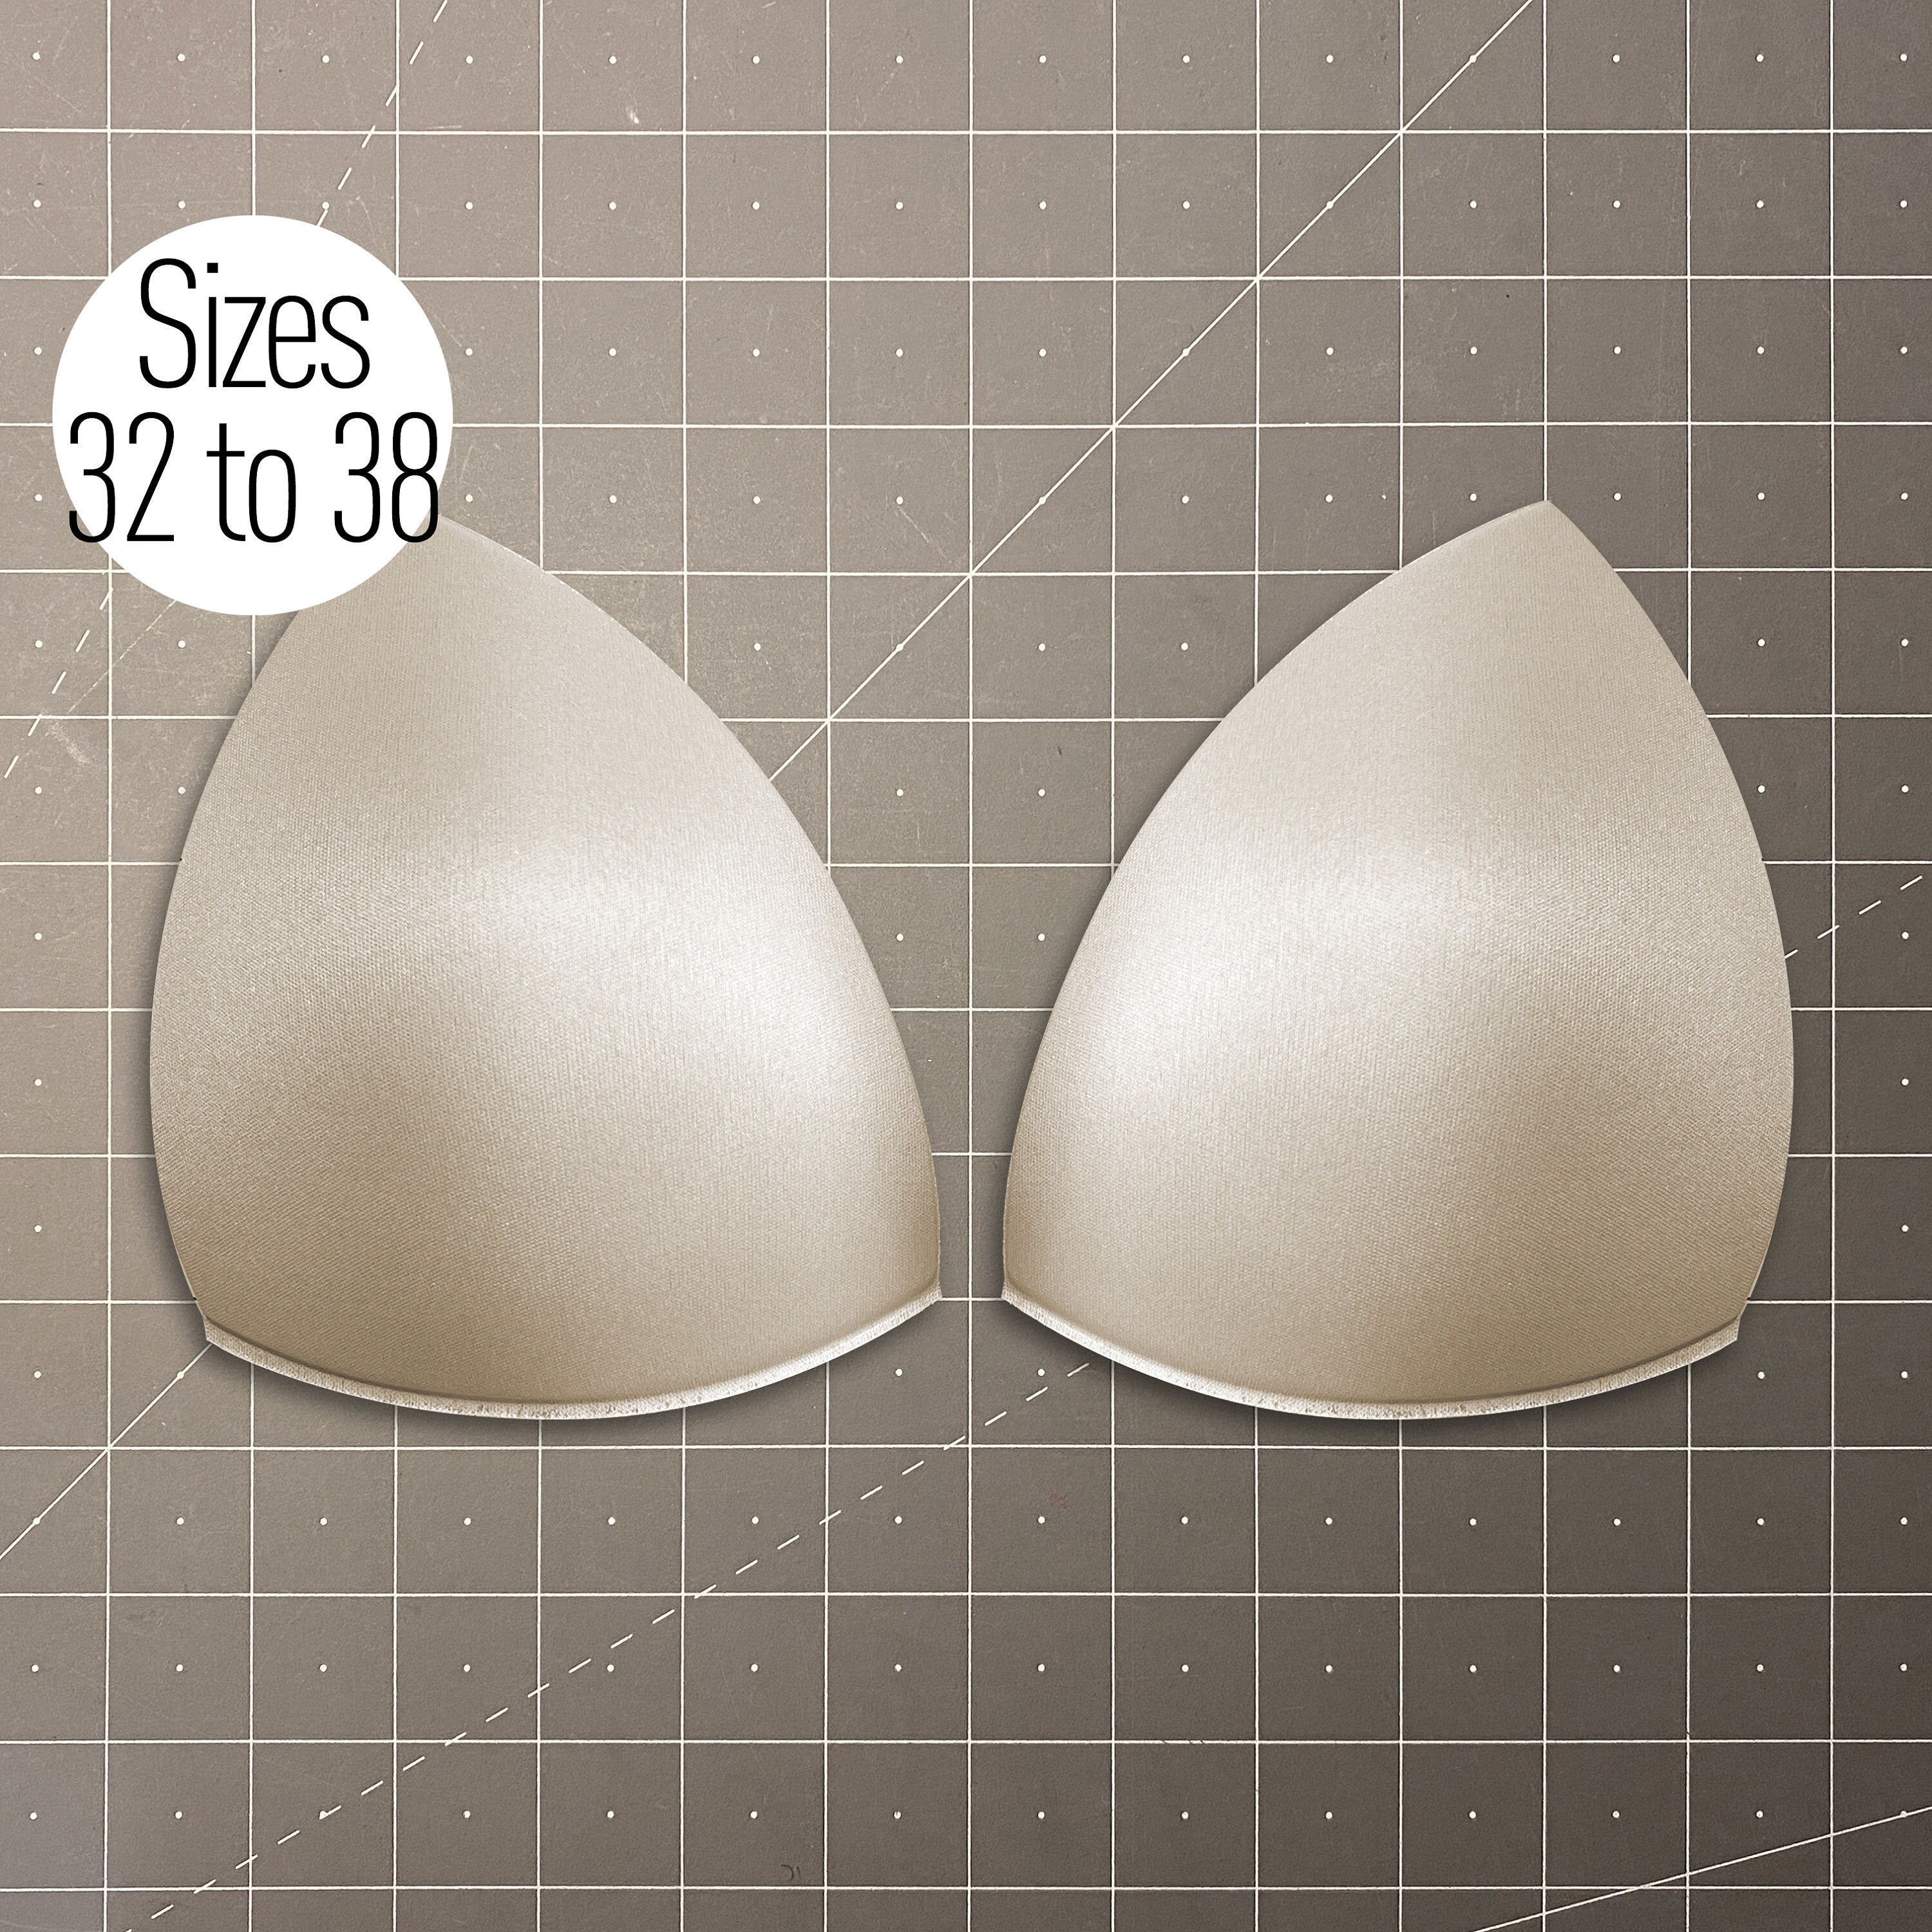 Push Up Triangular Shaped Style 2, Bra Cups or Sewn In for Lingerie, S –  Stitch Love Studio